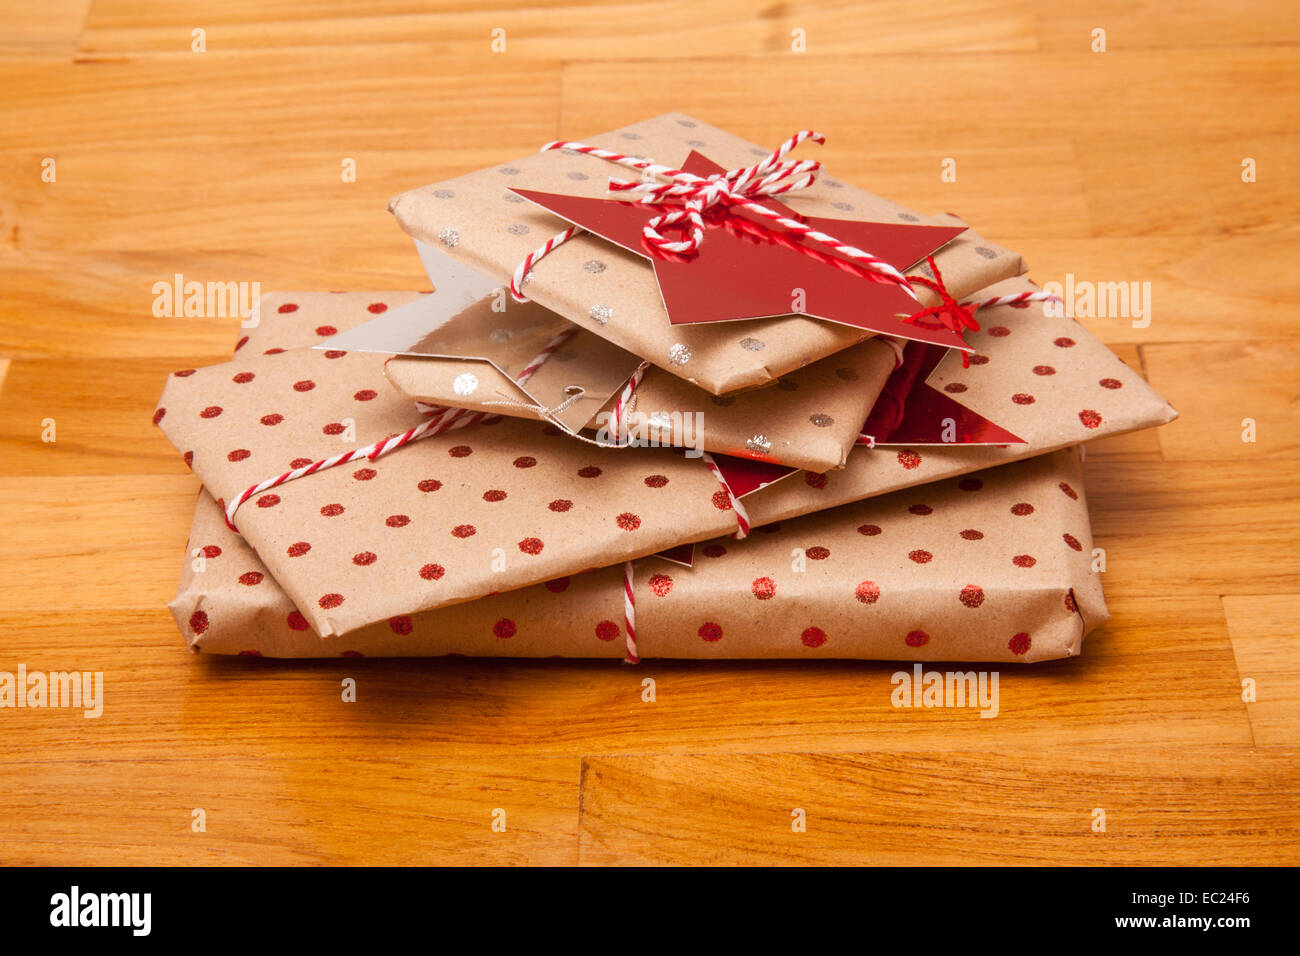 Wrapped birthday presents on a wooden floor. Stock Photo